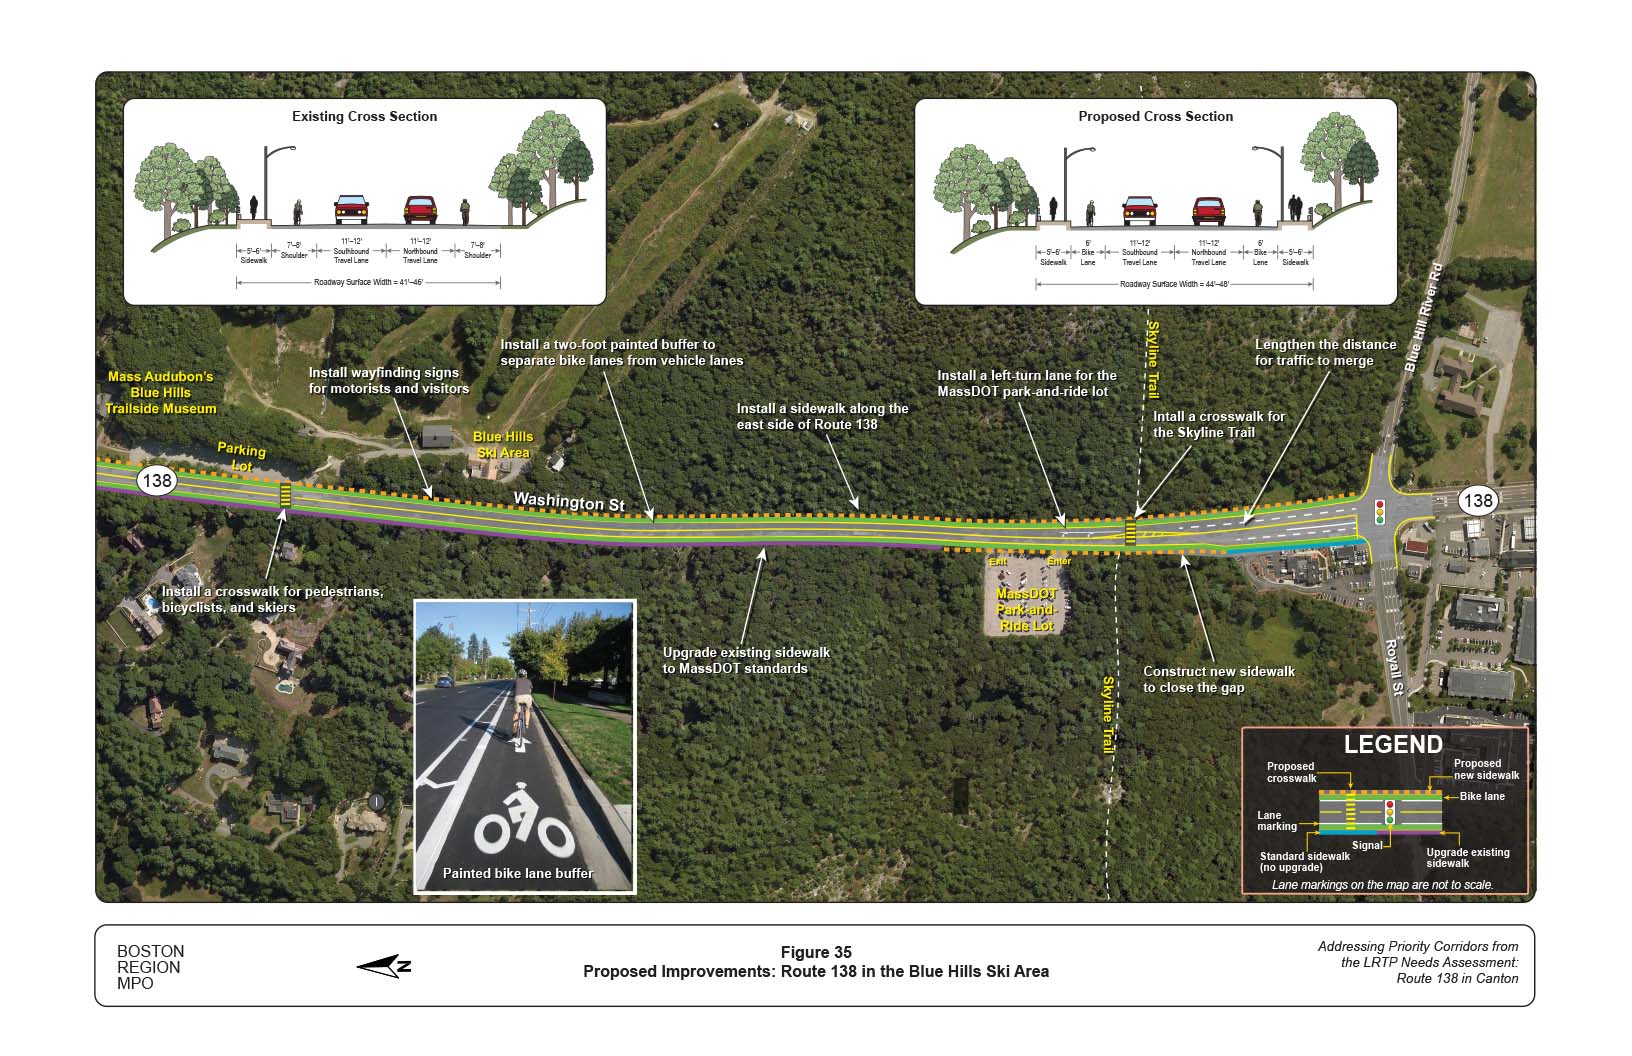 Figure 35 is map of Route 138 near the Blue Hills Ski Area with overlays showing the proposed improvements to the roadway and graphics of the current and proposed cross section of the roadway.